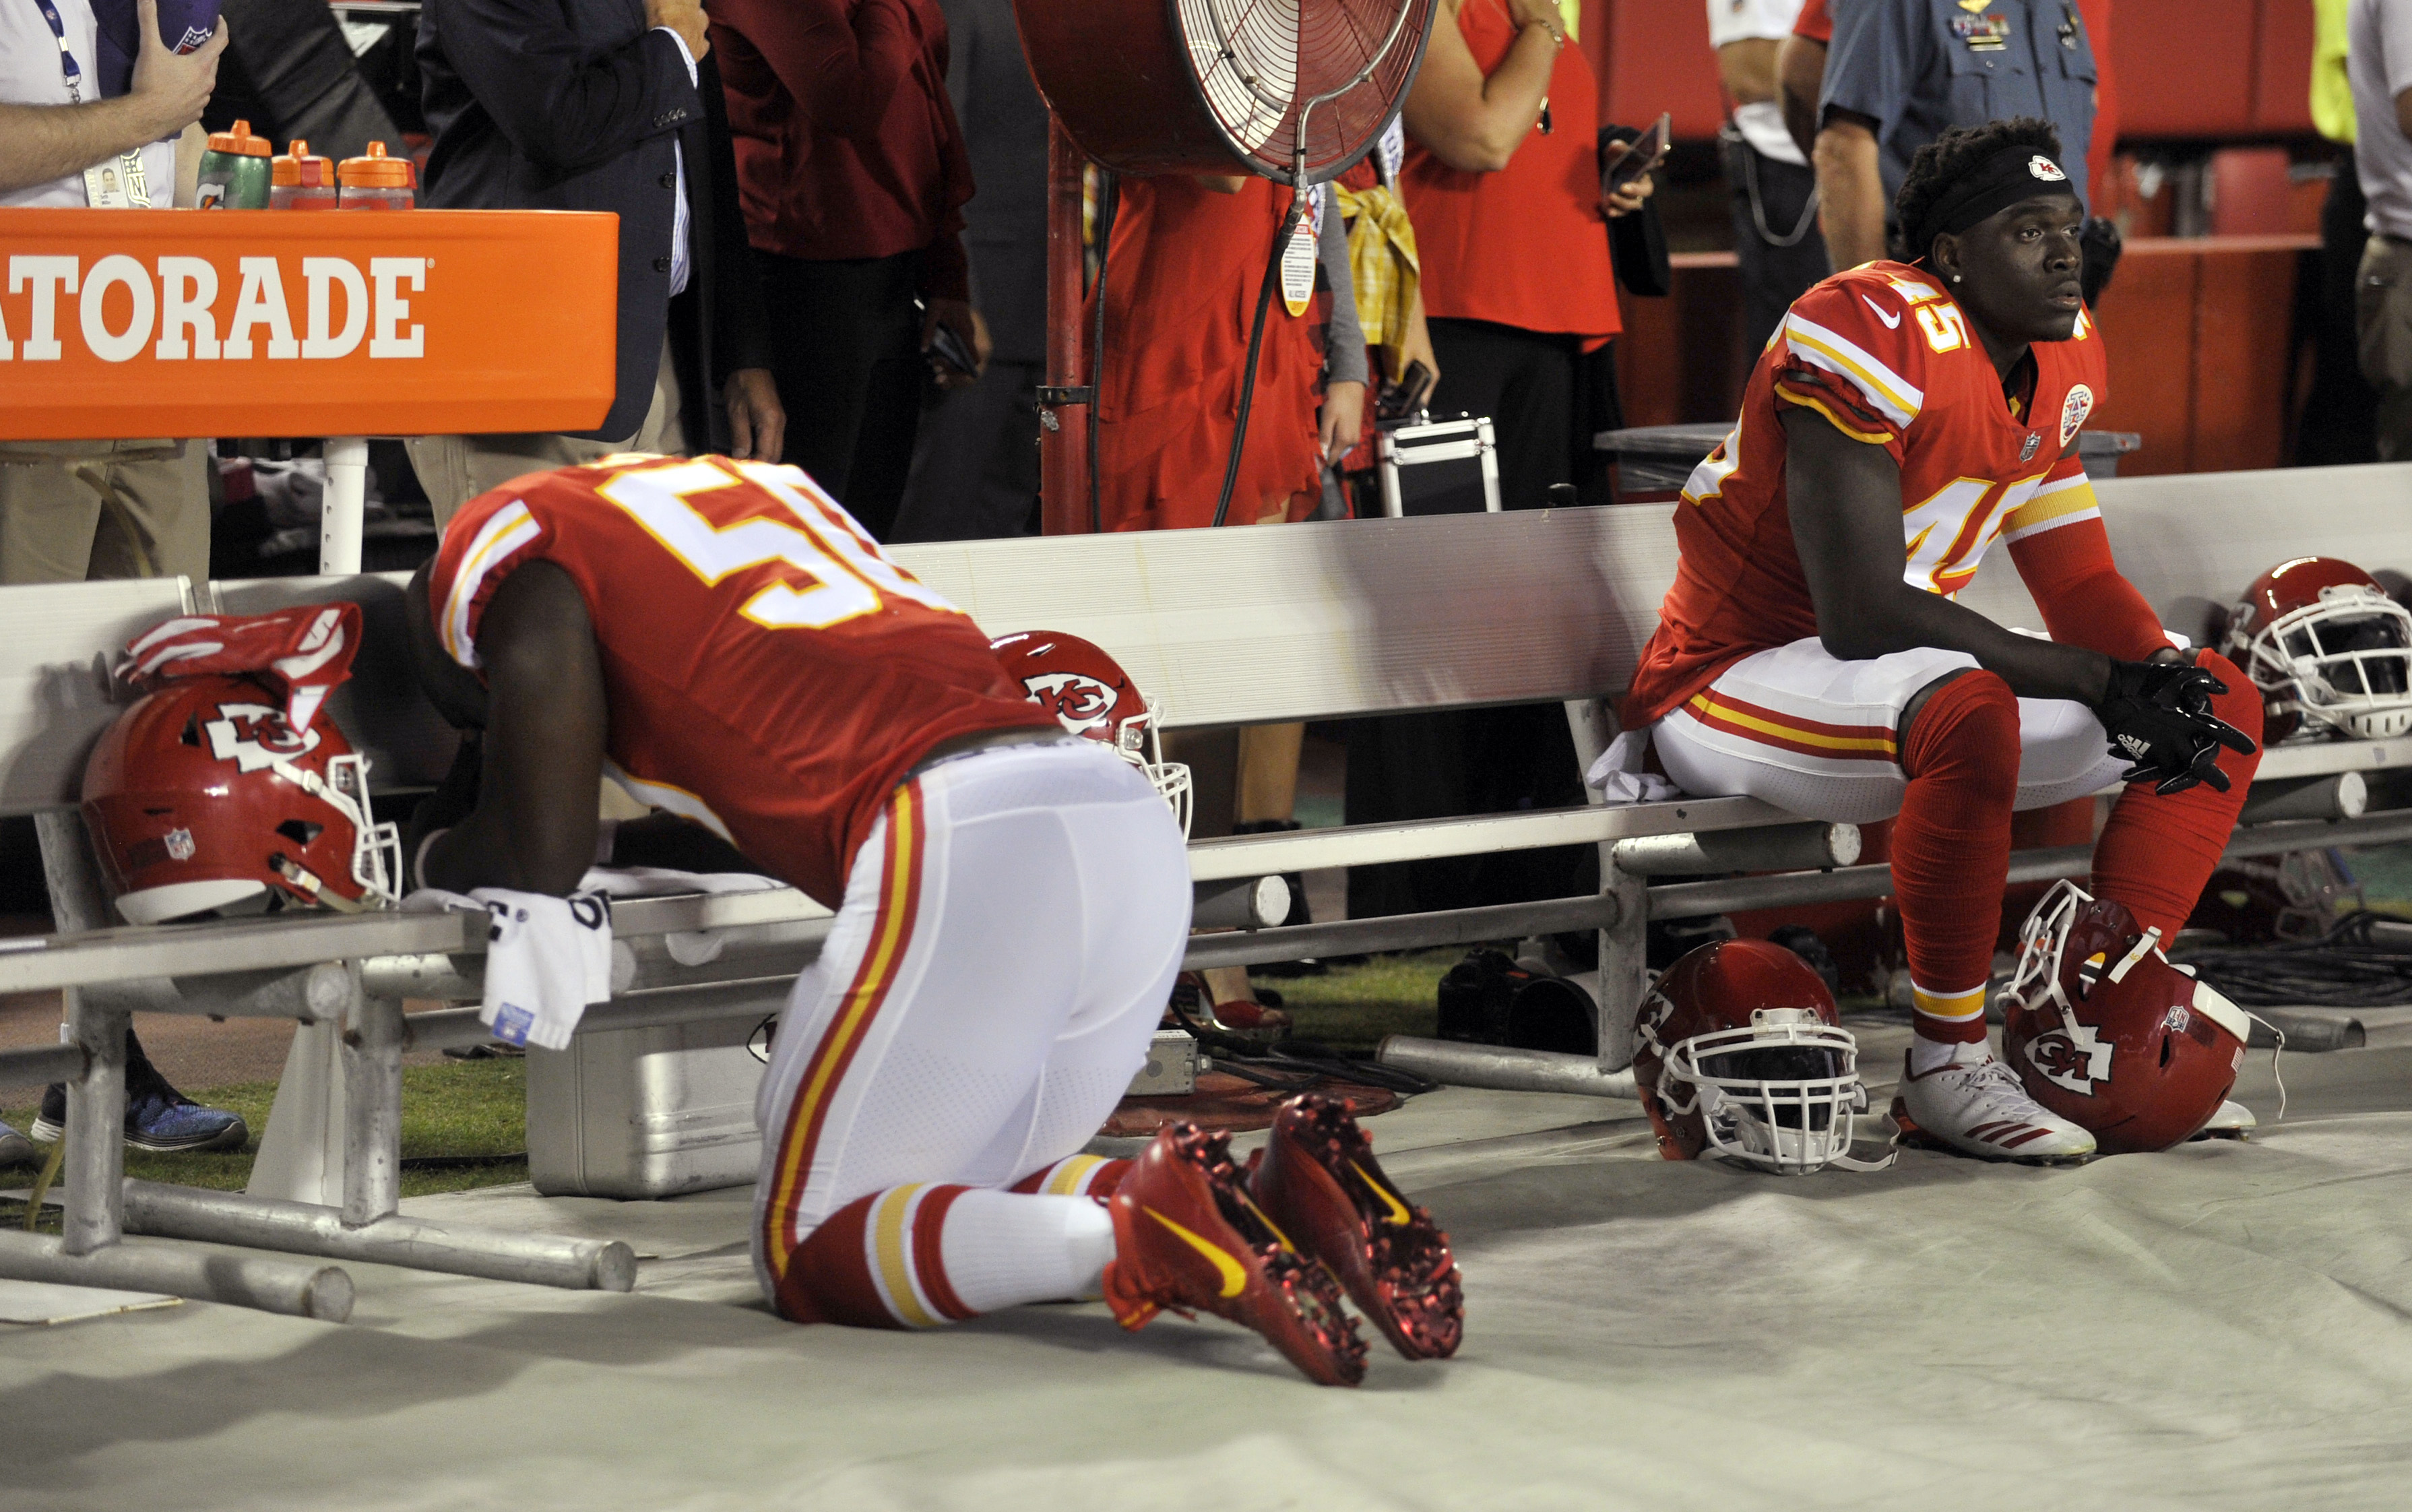 Kansas City Chiefs linebacker Justin Houston kneels during the national anthem before an NFL game.